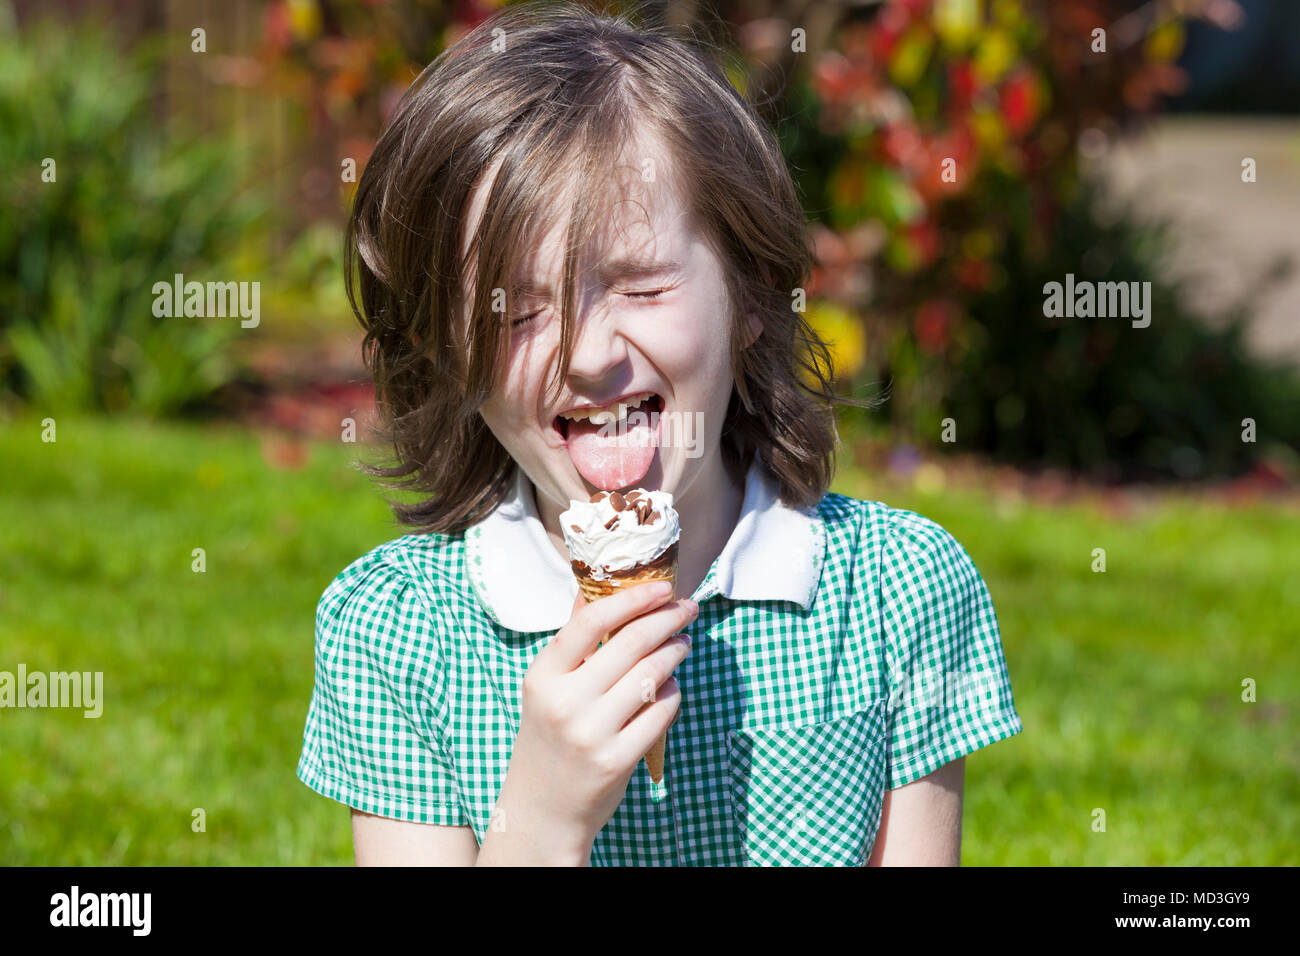 Ashford, Kent, UK. 18th Apr, 2018. UK Weather: A very hot day in Ashford, Kent this afternoon with temperatures expected to exceed 25°C in some parts of the country. Takara, an 8 year old girl enjoys an ice cream after just finishing school for the day. © Paul Lawrenson 2018, Photo Credit: PAL Images / Alamy Live News Stock Photo